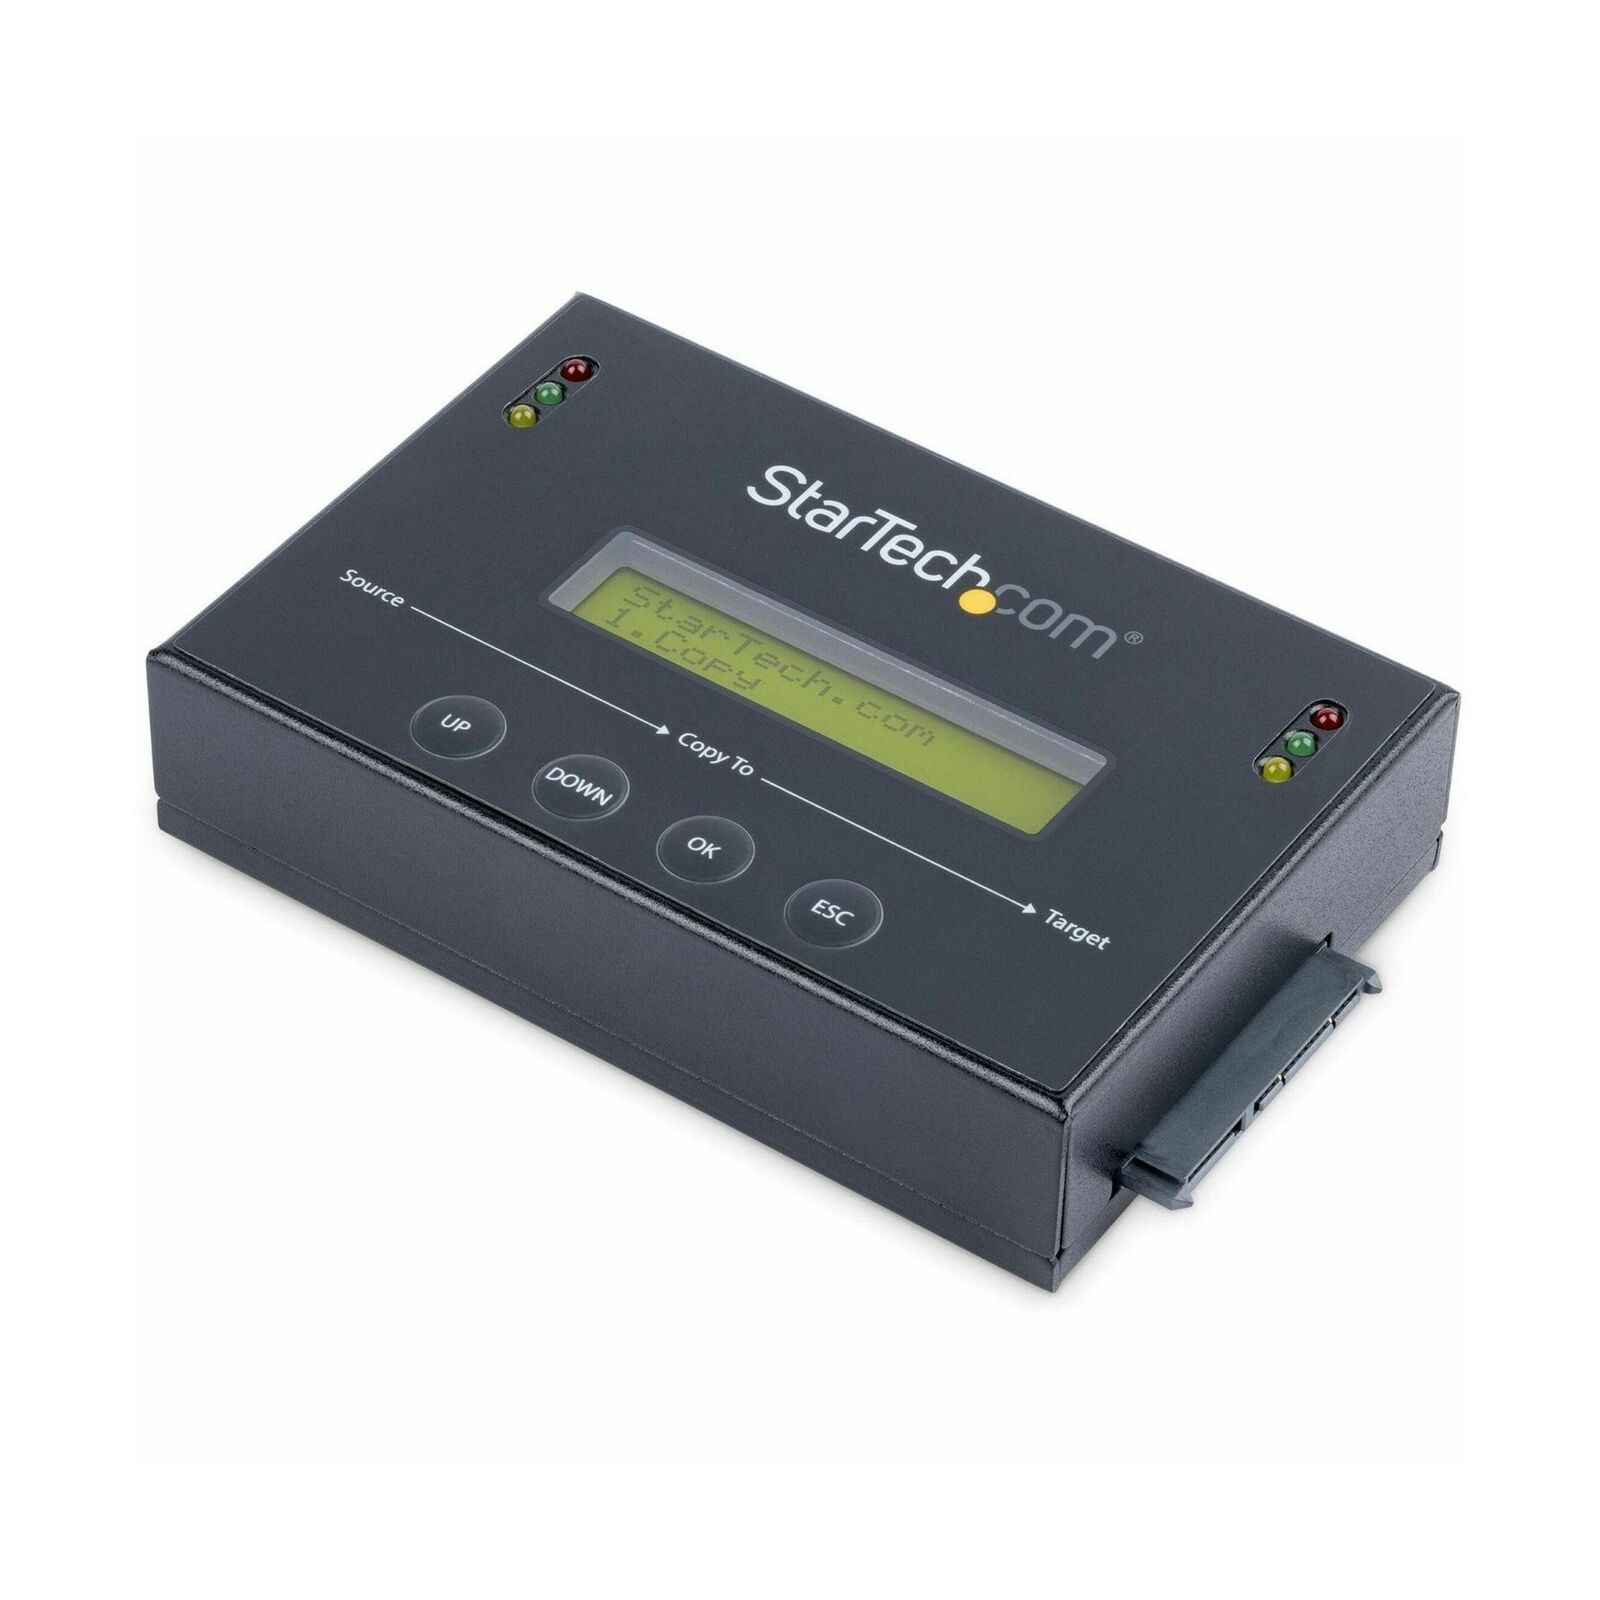 StarTech.com 1:1 Standalone Hard Drive Duplicator with Disk Image Manager For...